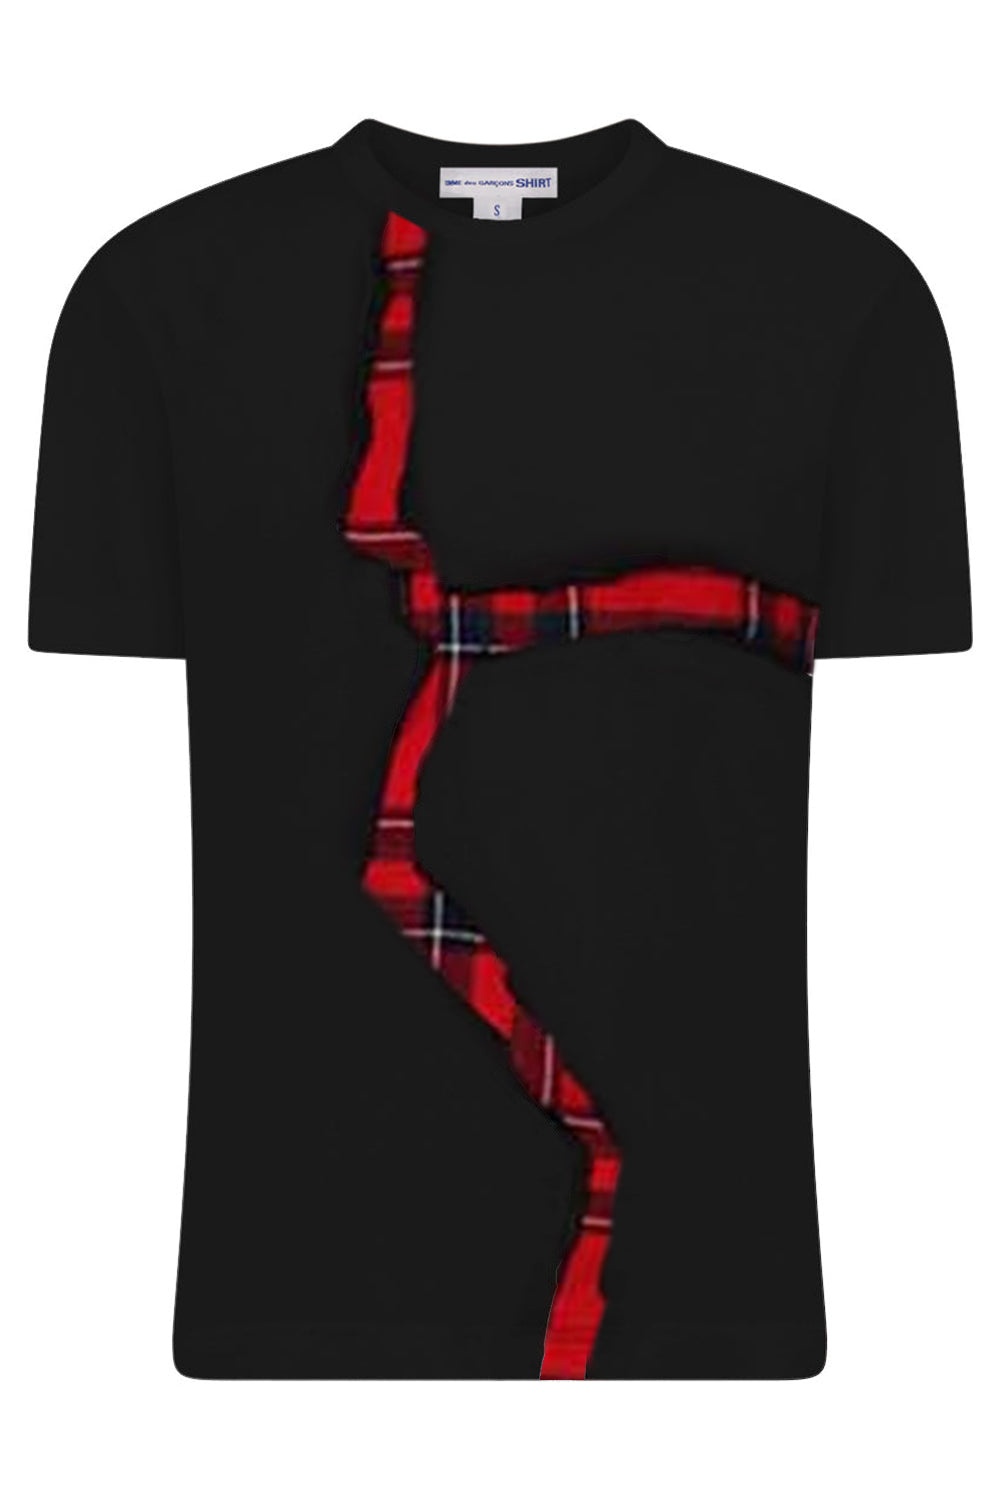 T-SHIRT WITH UNDERLAY RED CROSS | BLACK - 1